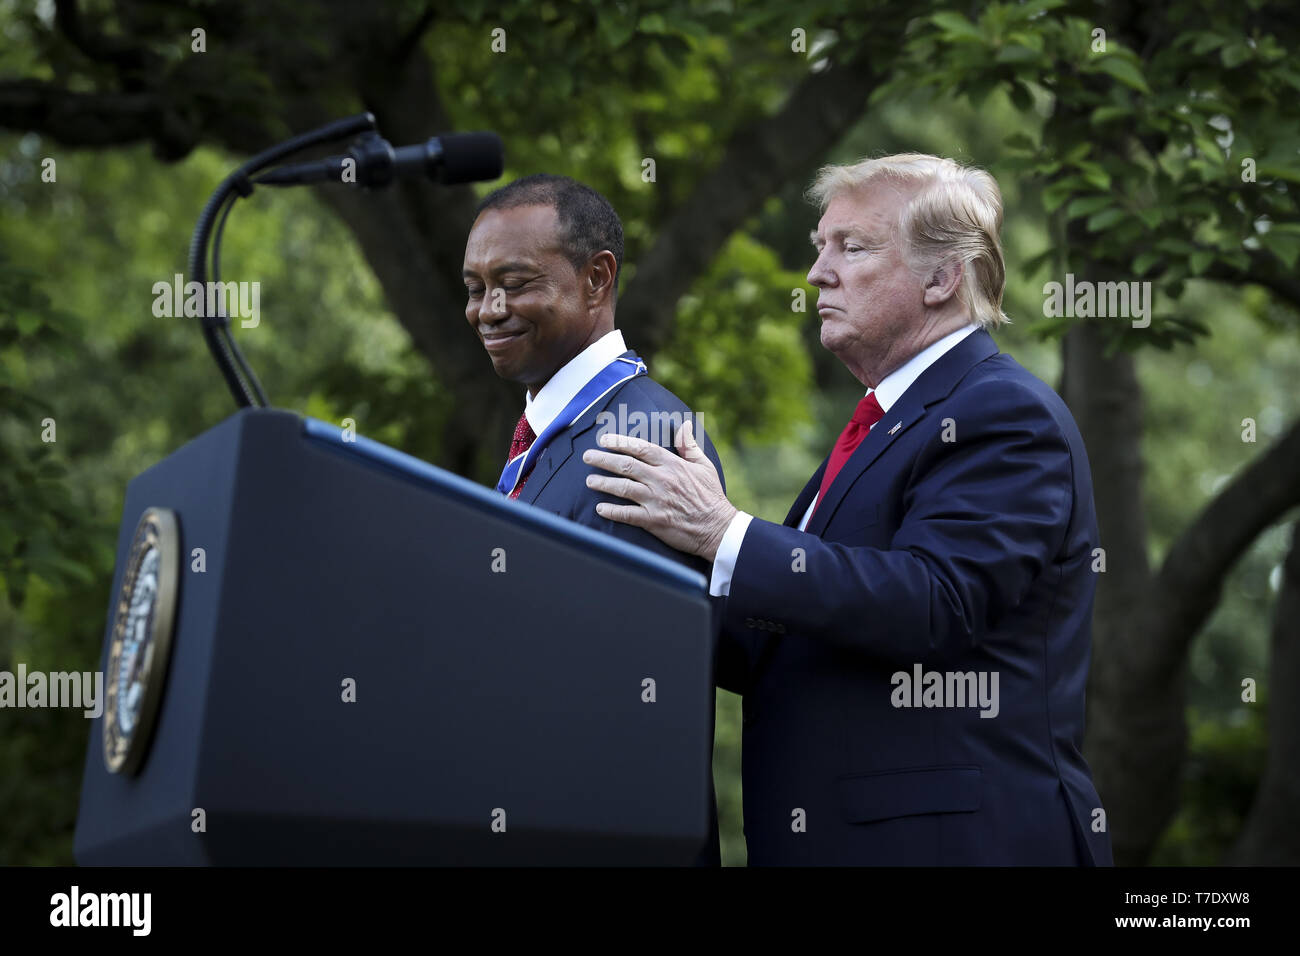 Washington, District of Columbia, USA. 6th May, 2019. United States President Donald J. Trump presents the Presidential Medal of Freedom to Tiger Woods during a ceremony in the Rose Garden of the White House on May 6, 2019 in Washington, DC. Credit: Oliver Contreras/Pool via CNP Credit: Oliver Contreras/CNP/ZUMA Wire/Alamy Live News Stock Photo